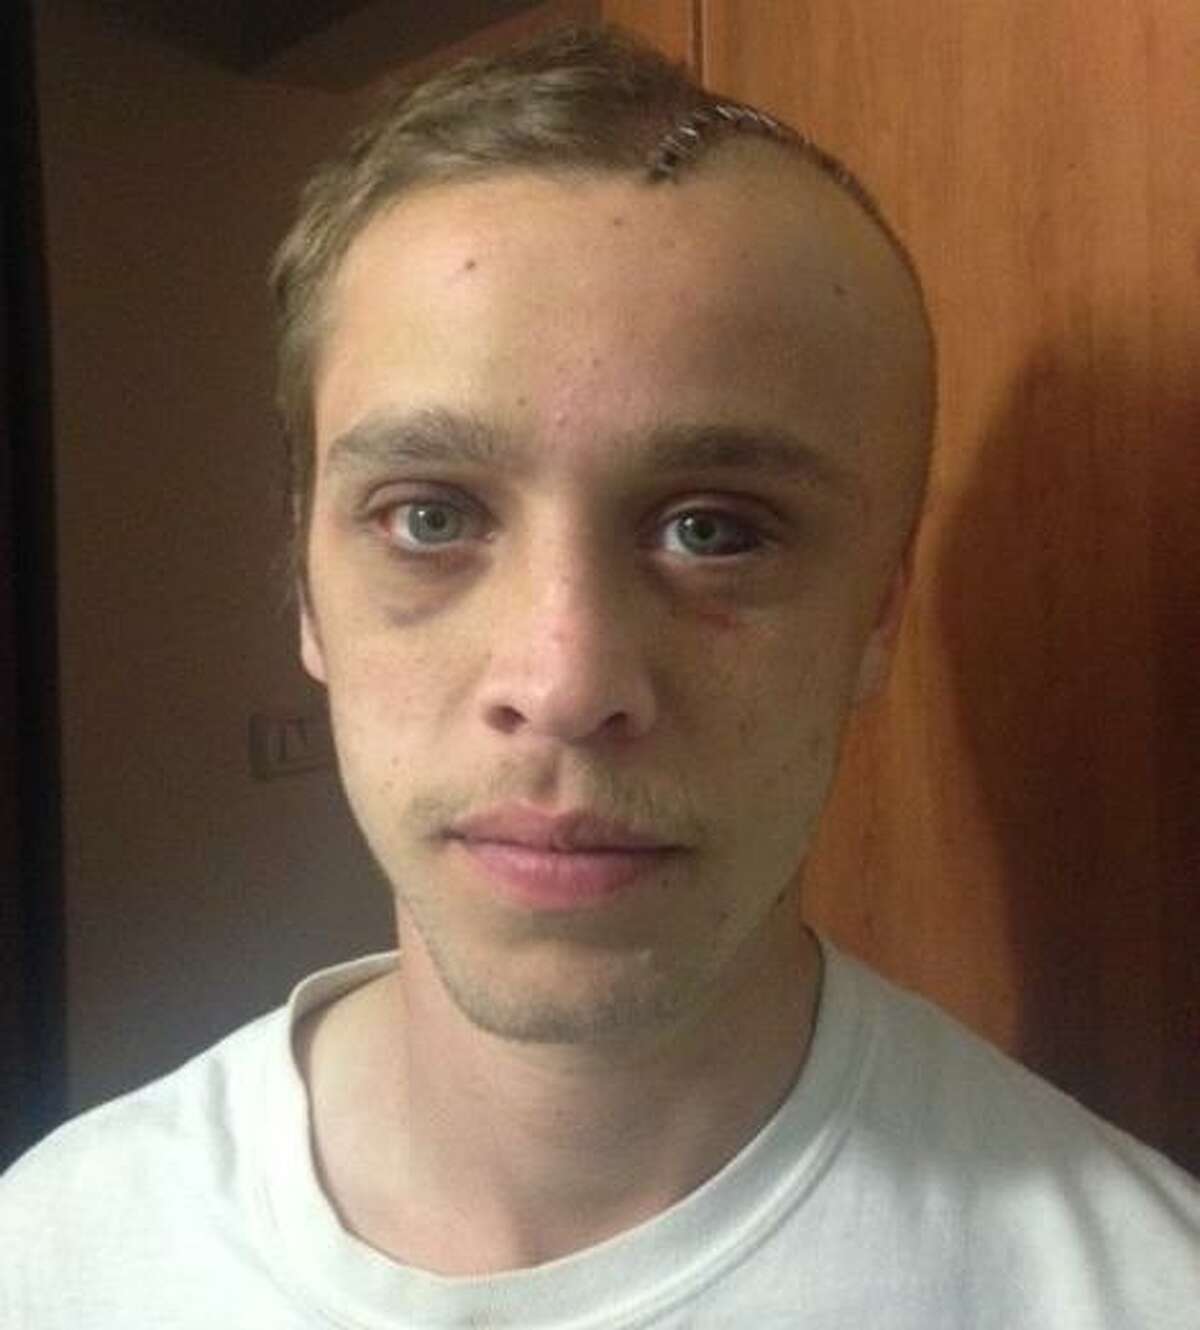 Pro skateboarder Raney Beres of San Antonio after an accident required surgery on his skull.